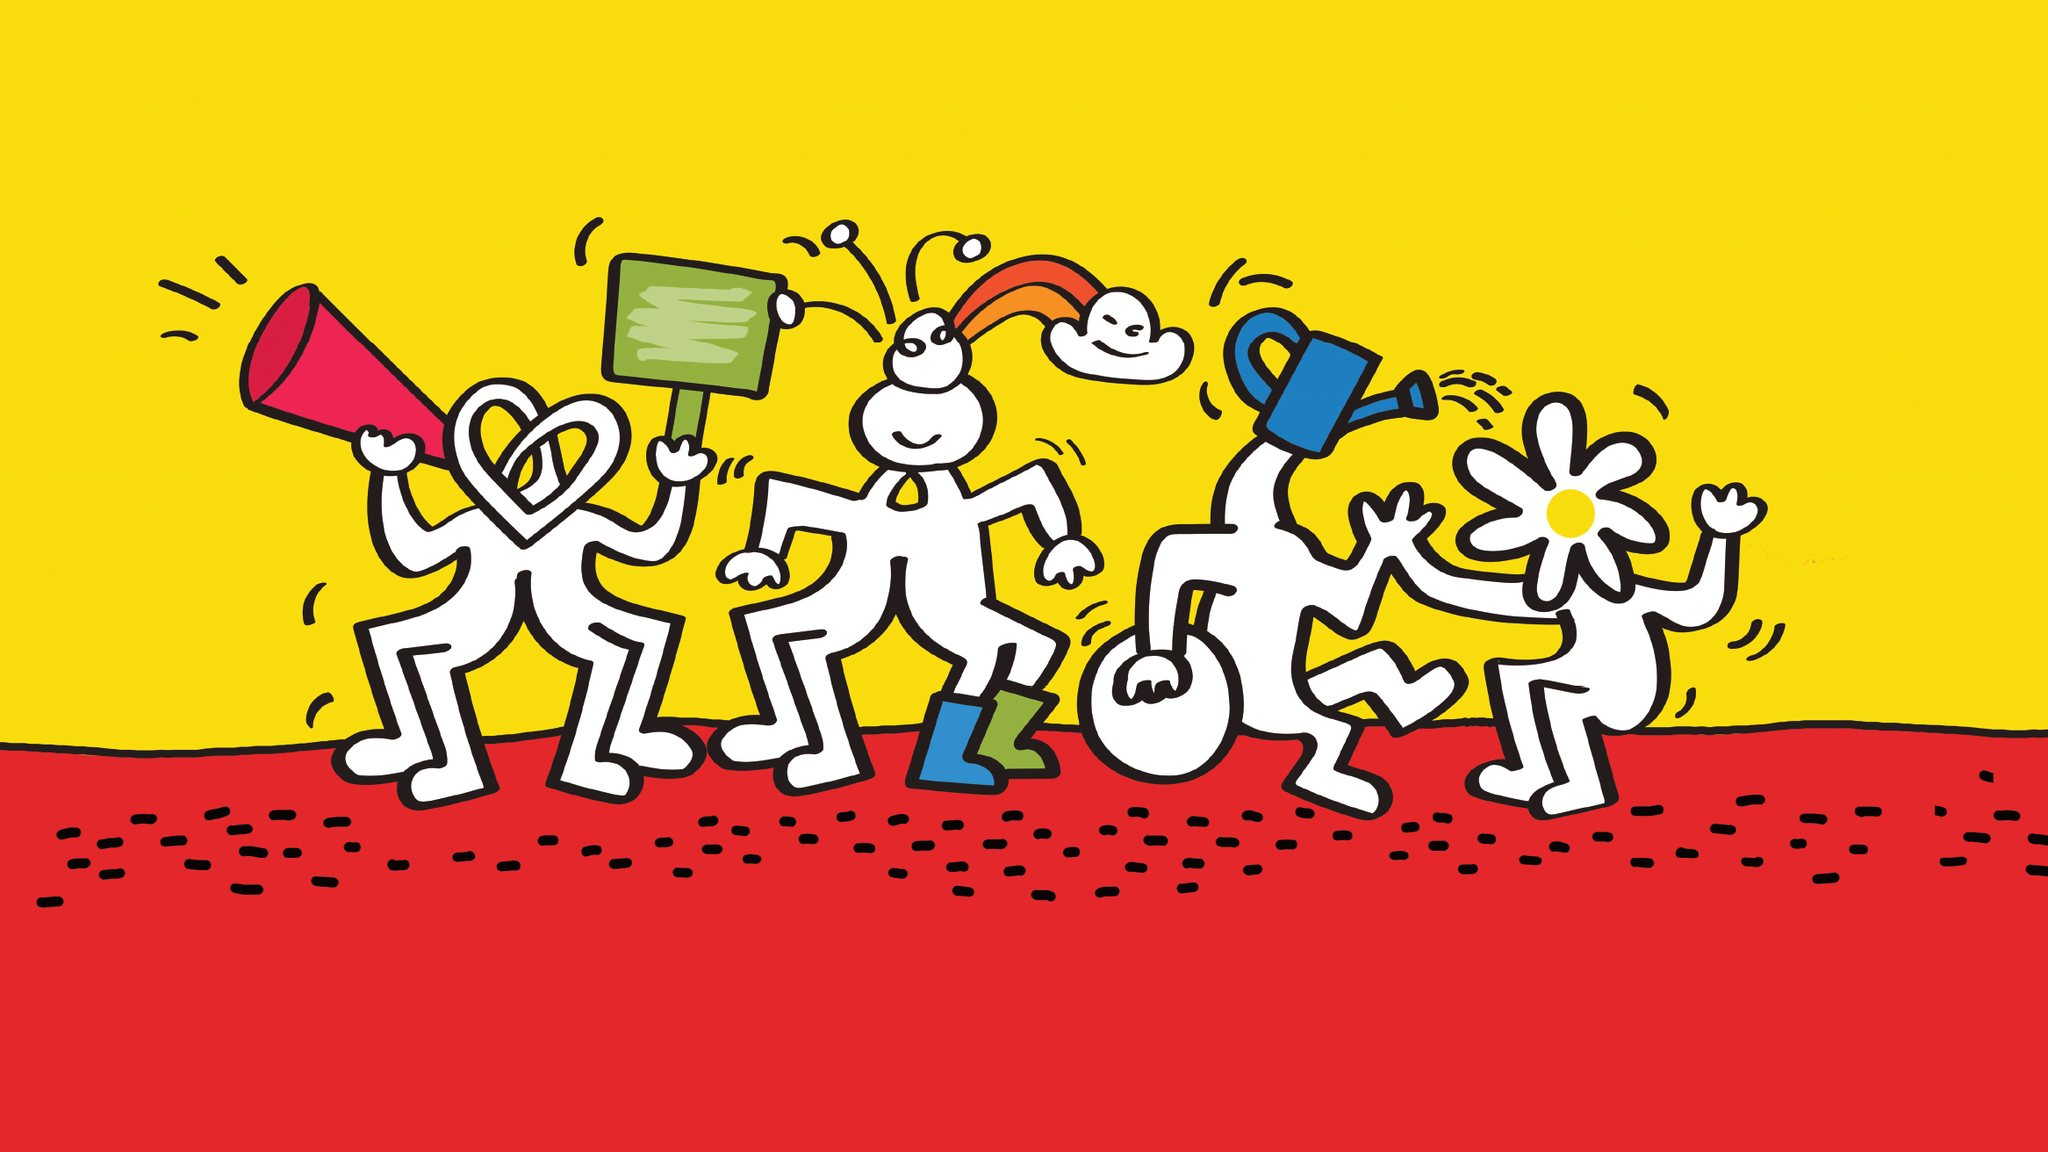 Keith Haring inspired figures dancing on a red floor with a yellow sky.